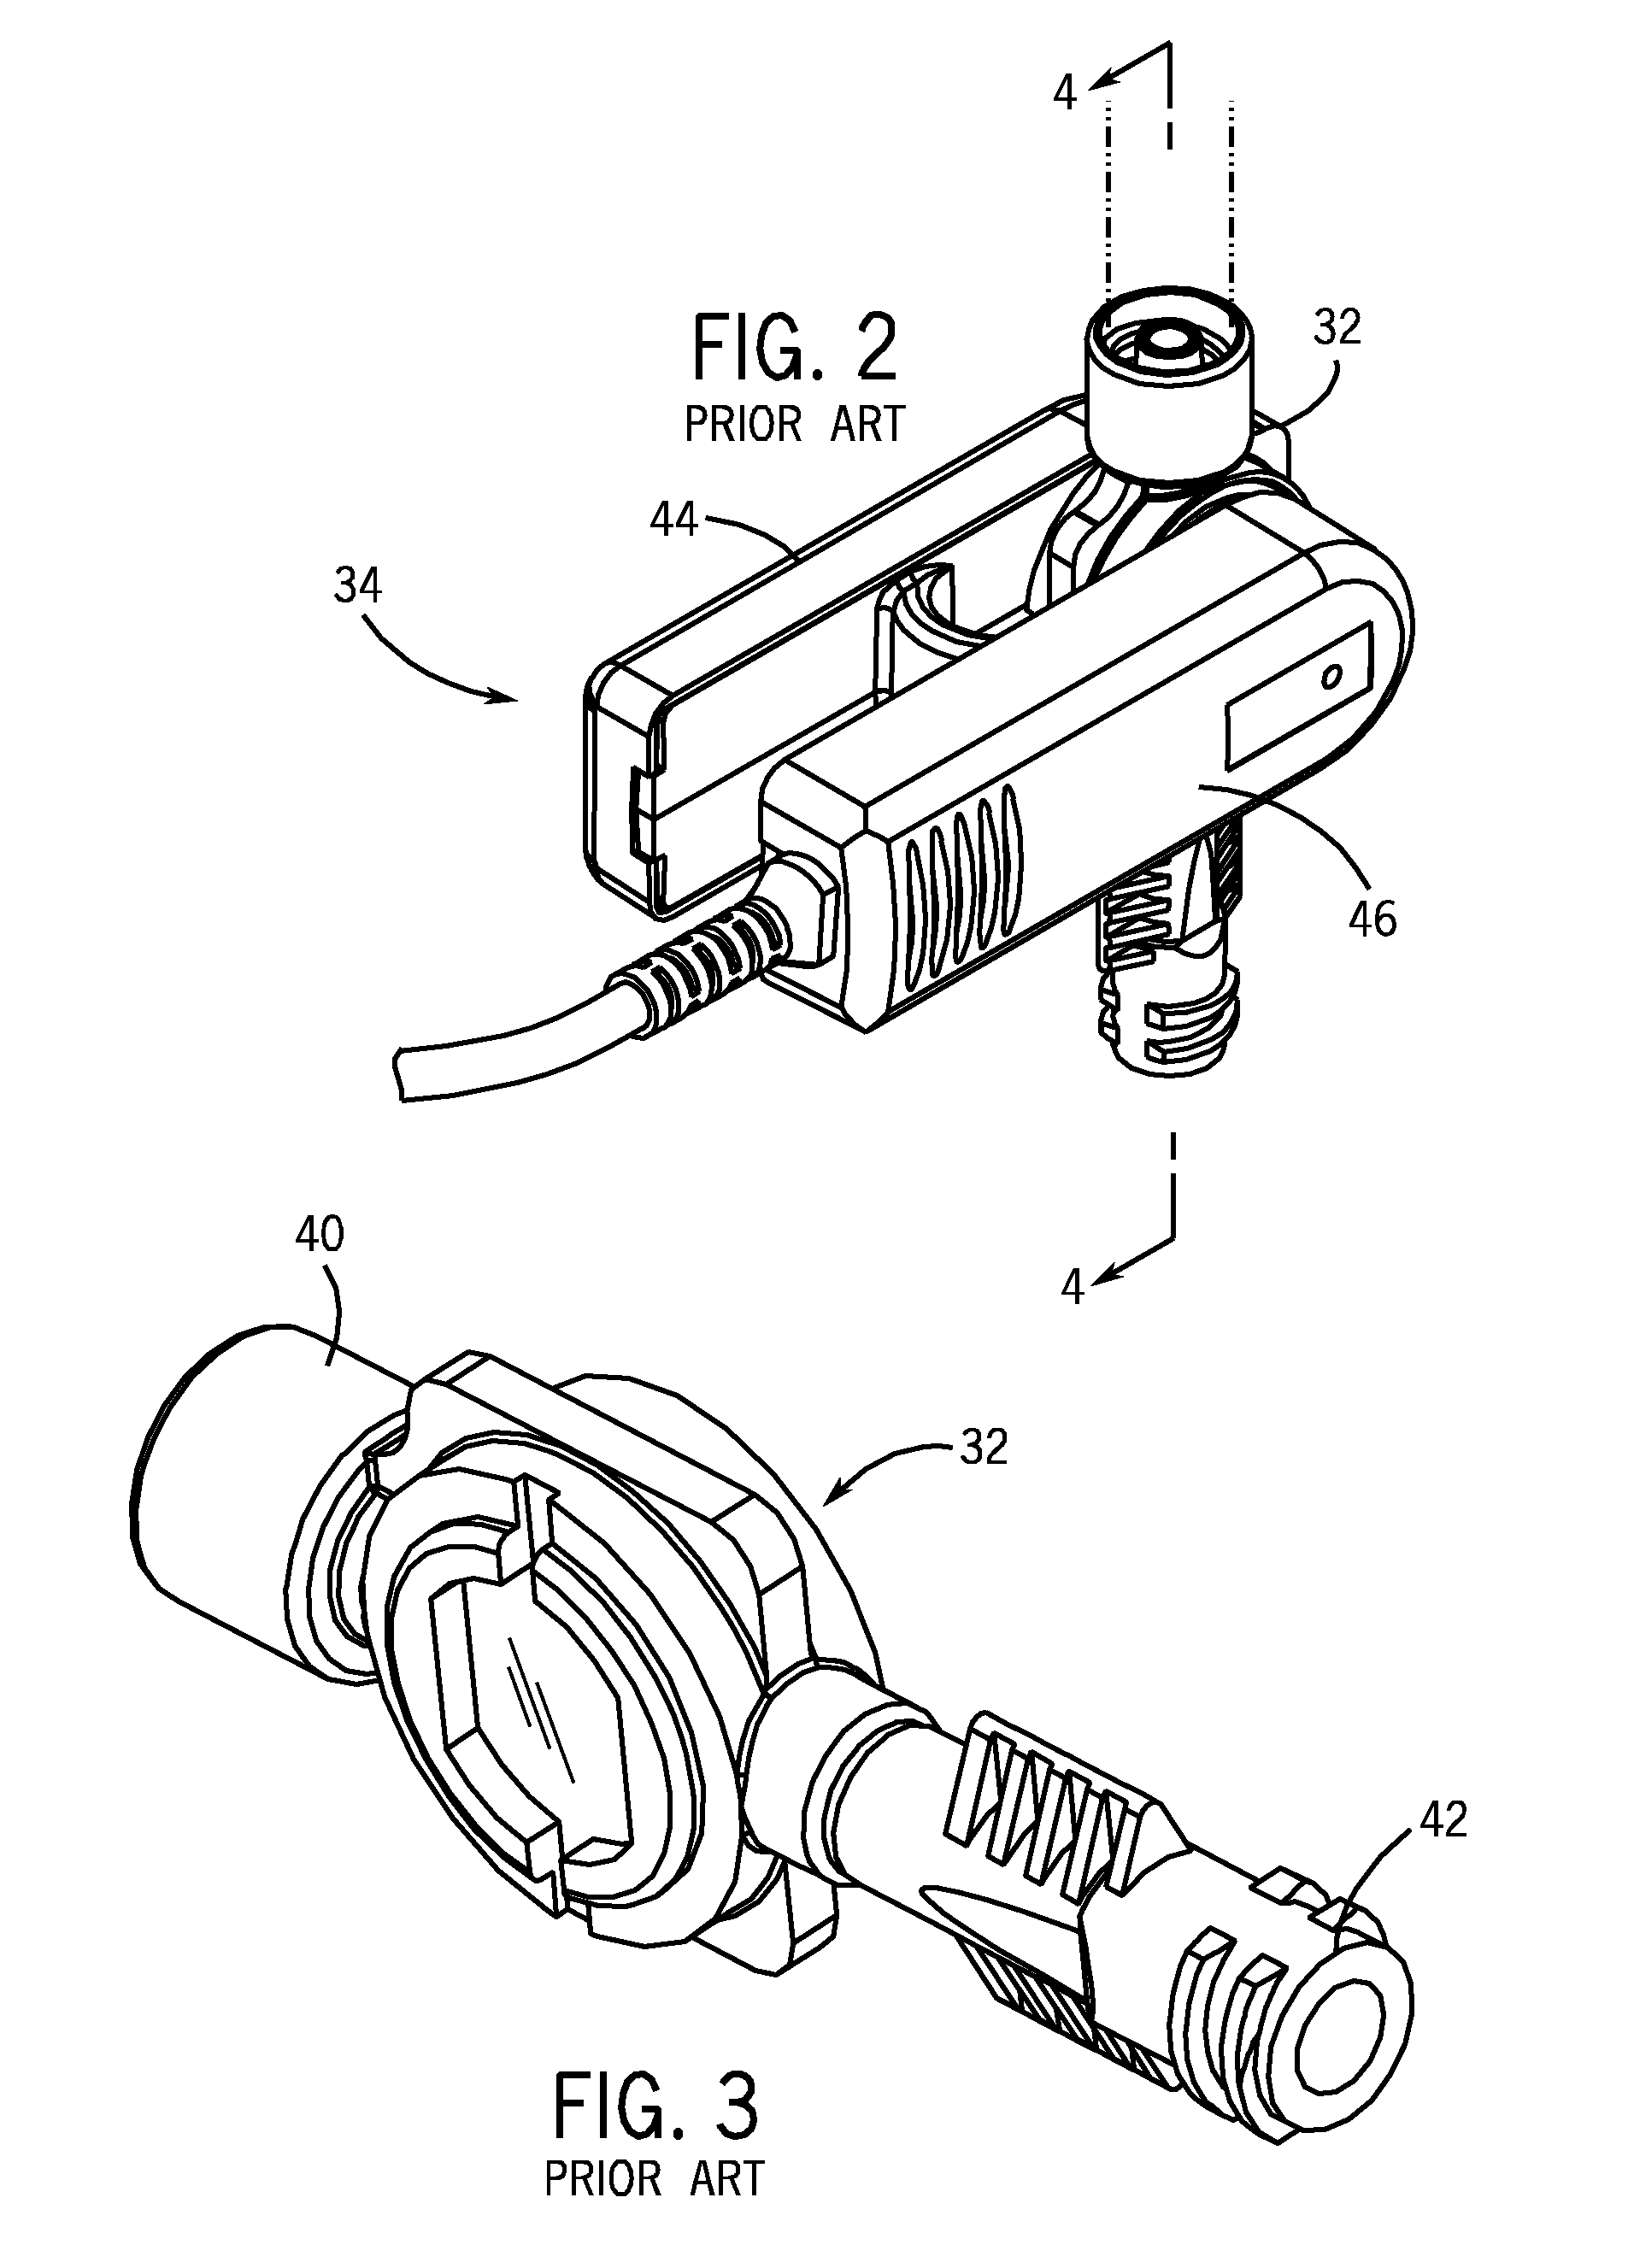 Sensor clip assembly for an optical monitoring system